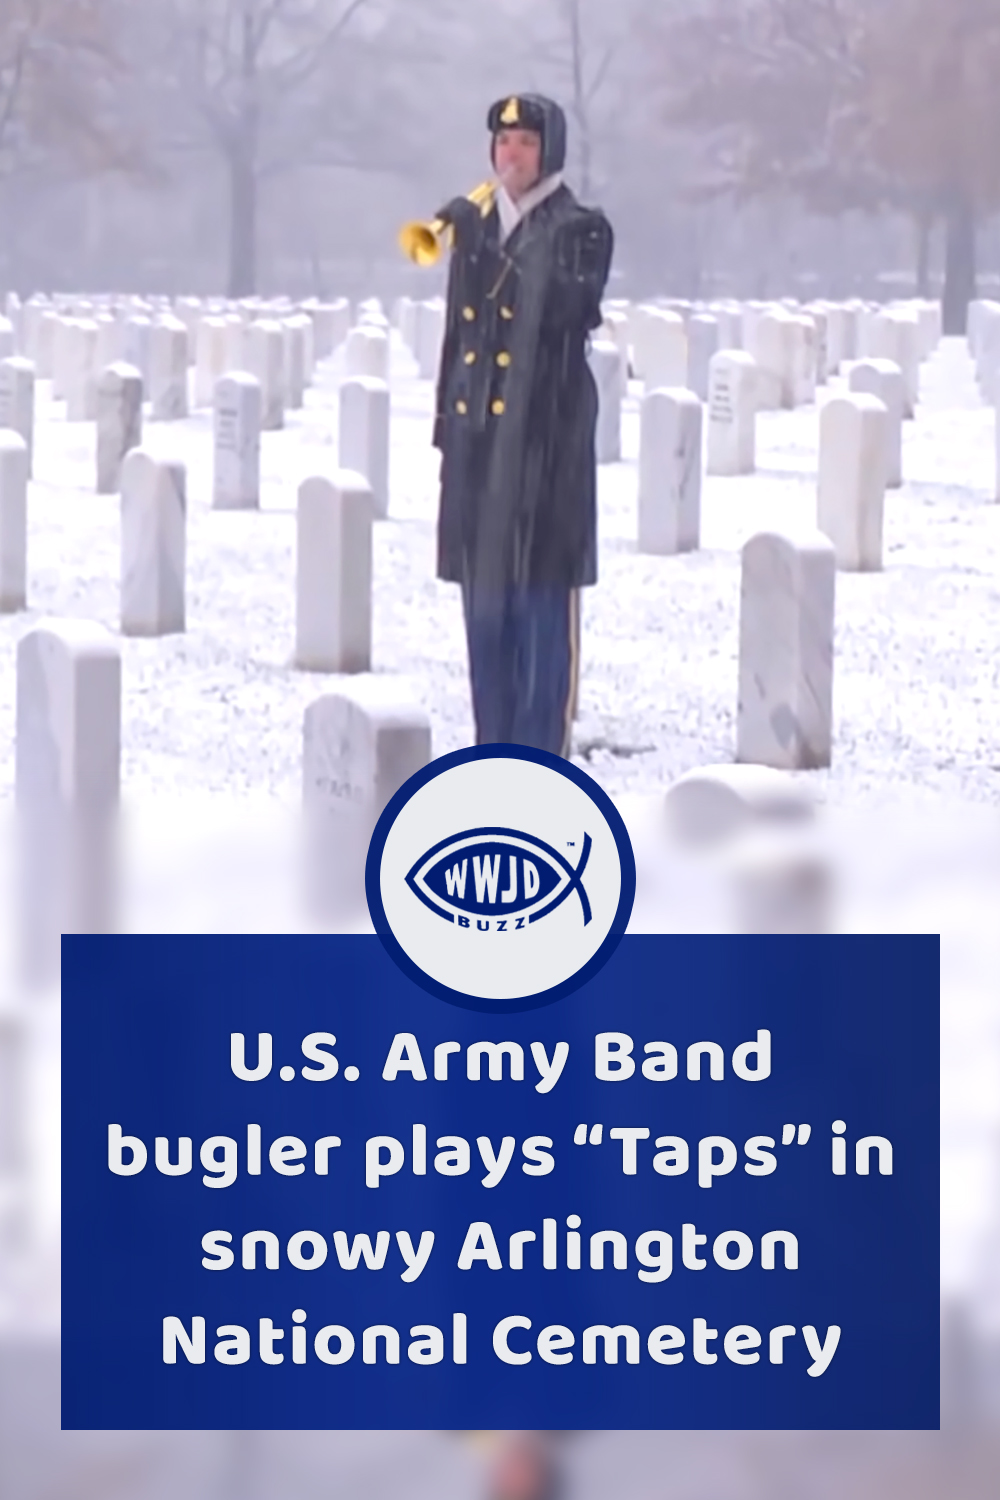 U.S. Army Band bugler plays “Taps” in snowy Arlington National Cemetery